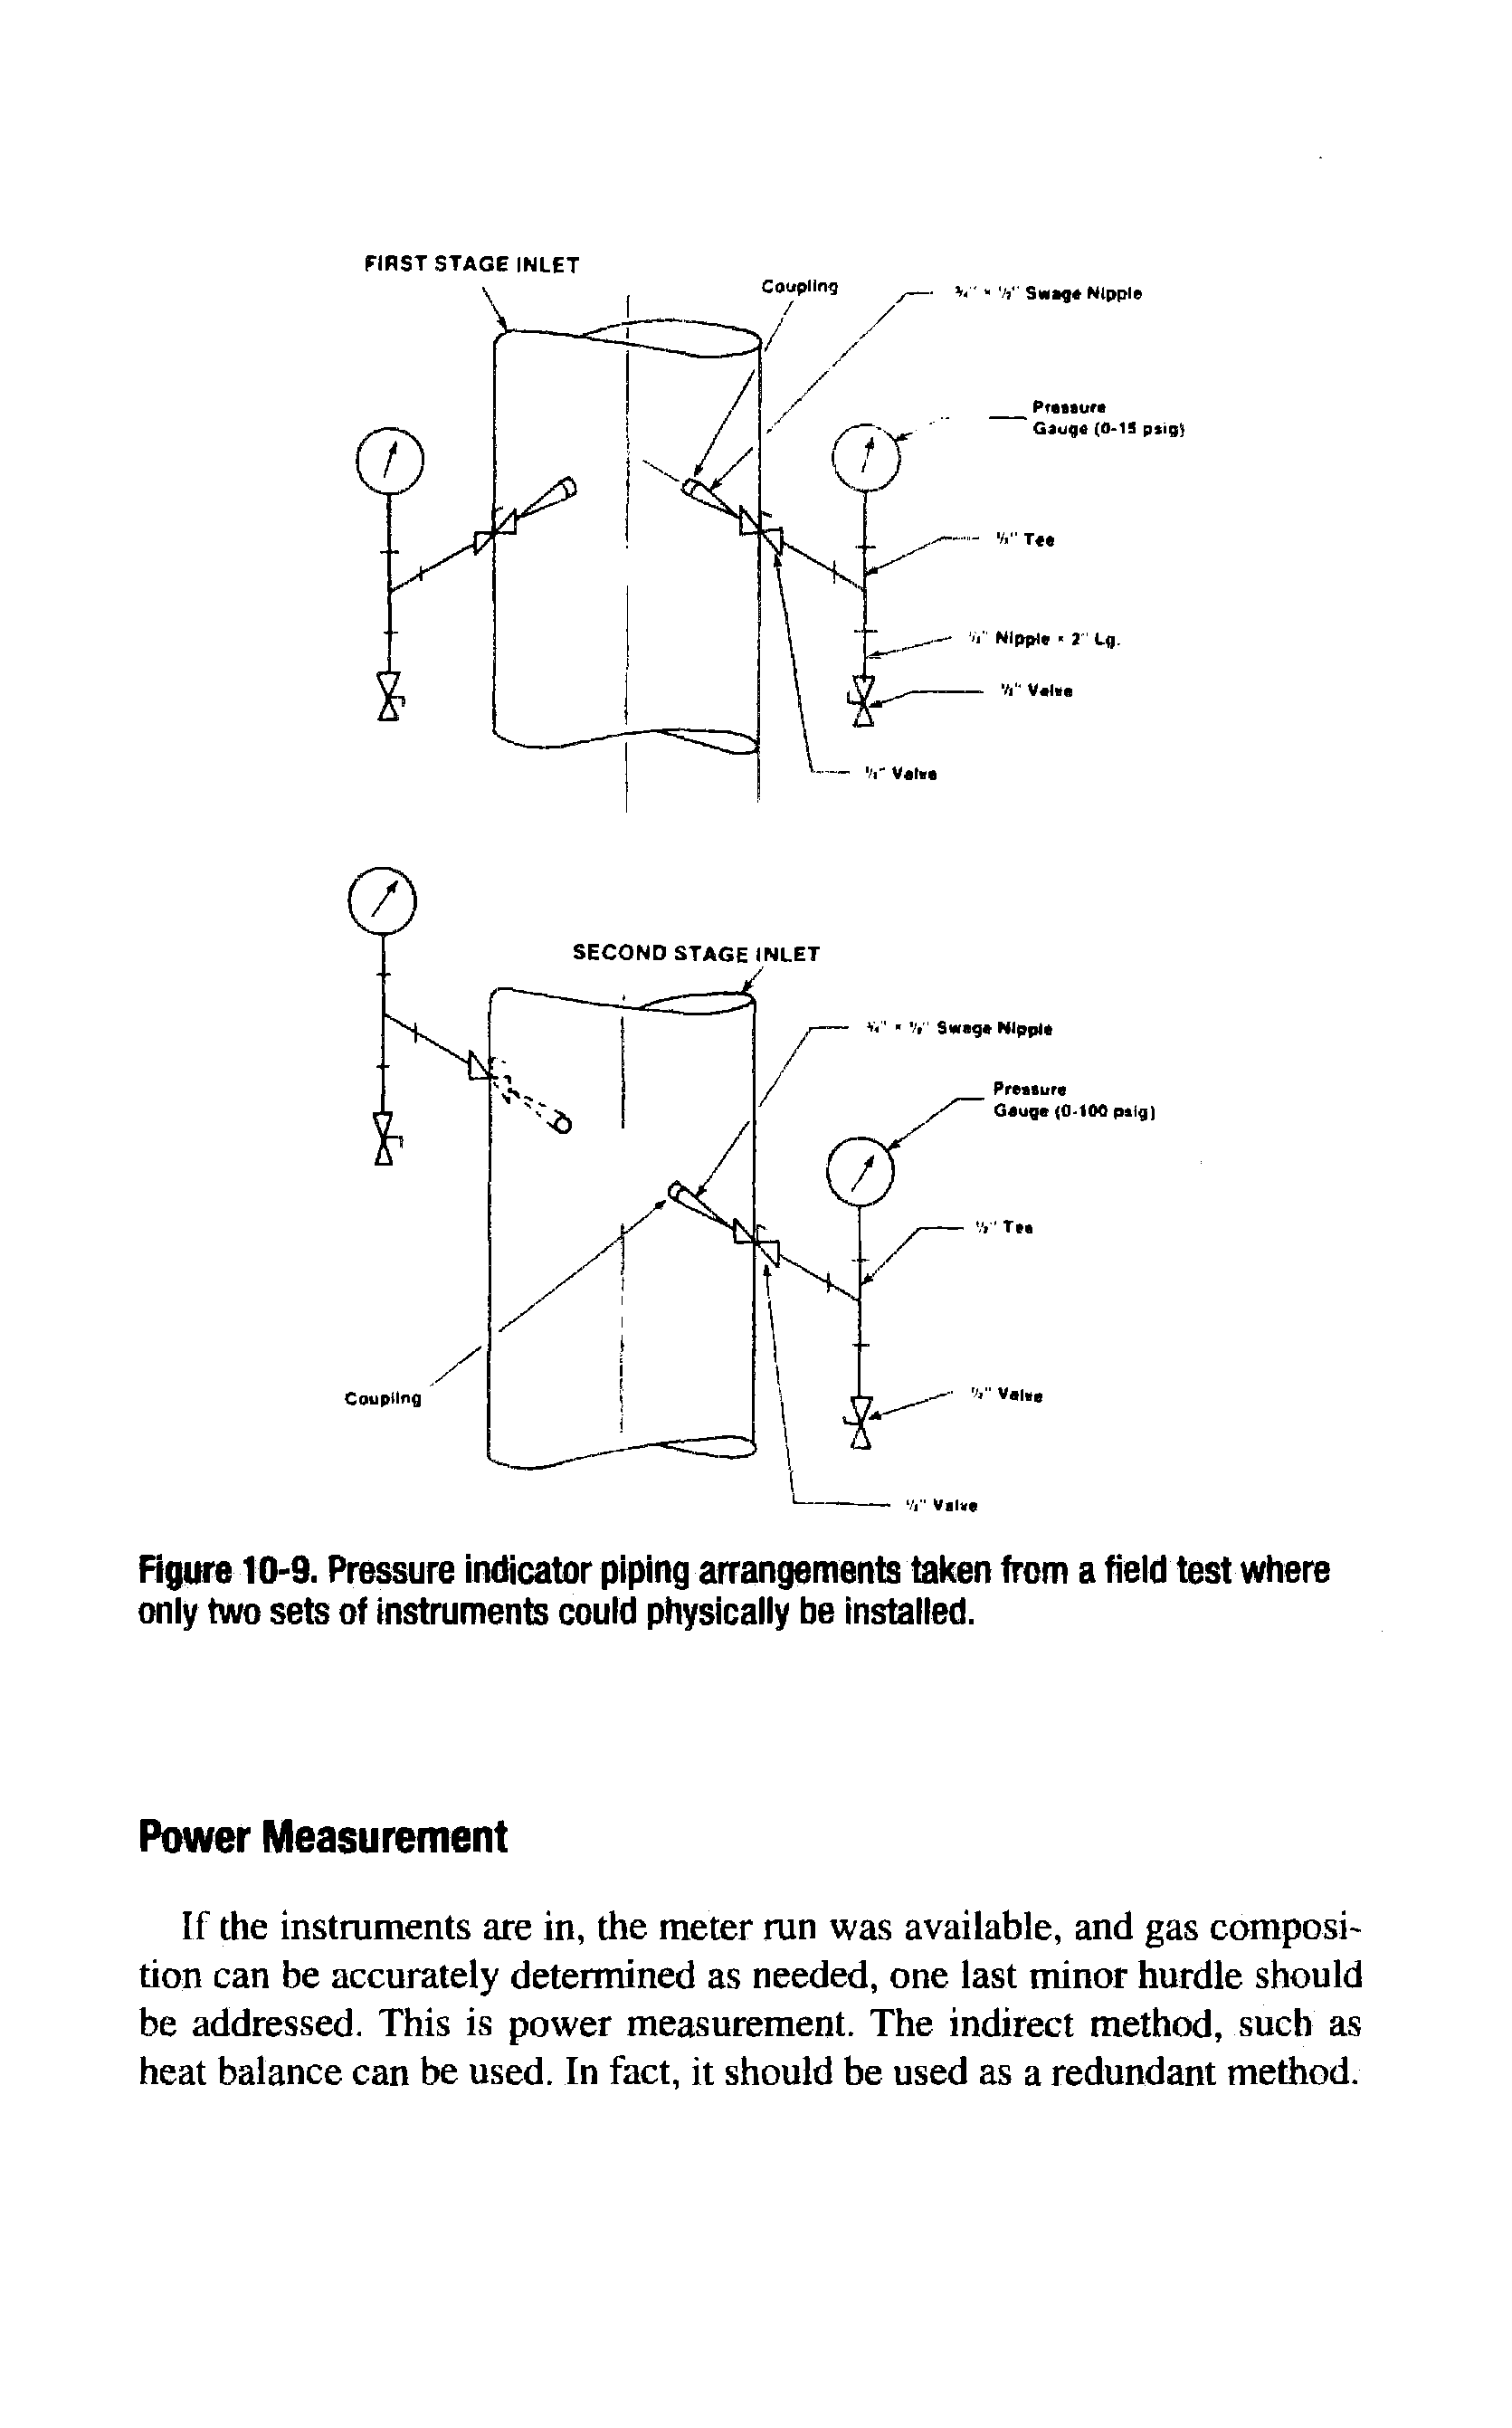 Figure 10-9. Pressure indicator piping arrangements taken from a field test where only two sets of instruments could physically be installed.